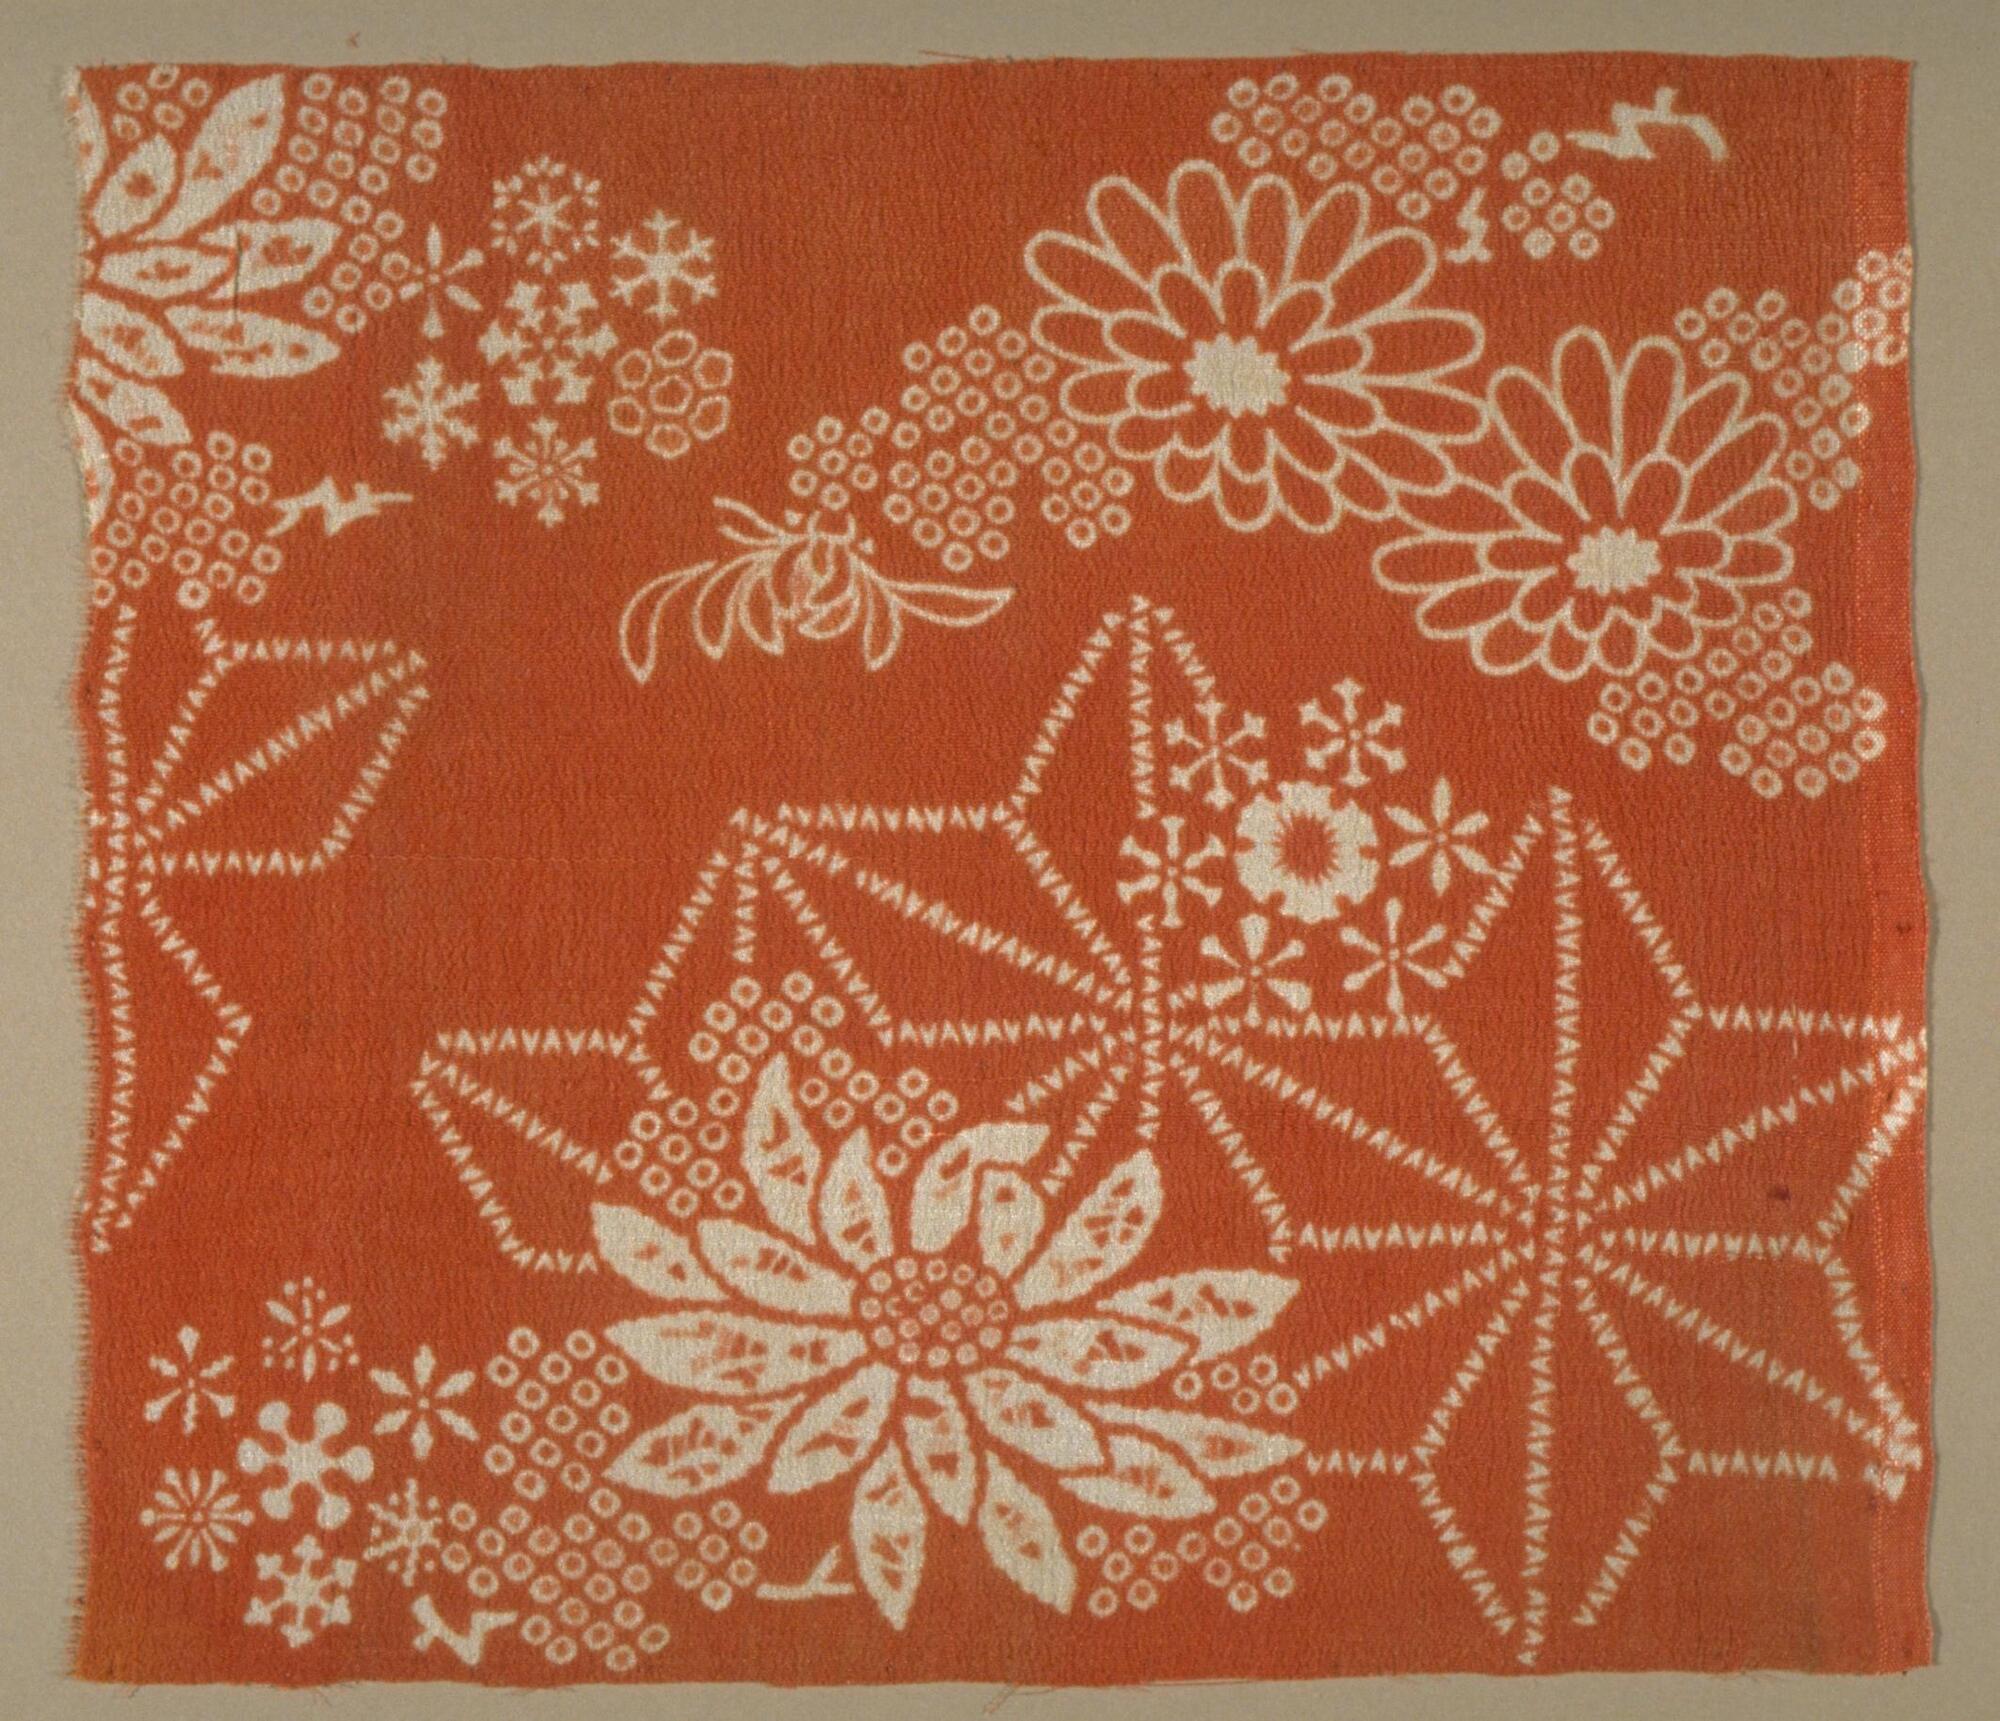 A red kimono fragment, with white stenciled design of chrysanthemums, hemp-leaf flowers, and snowflakes.